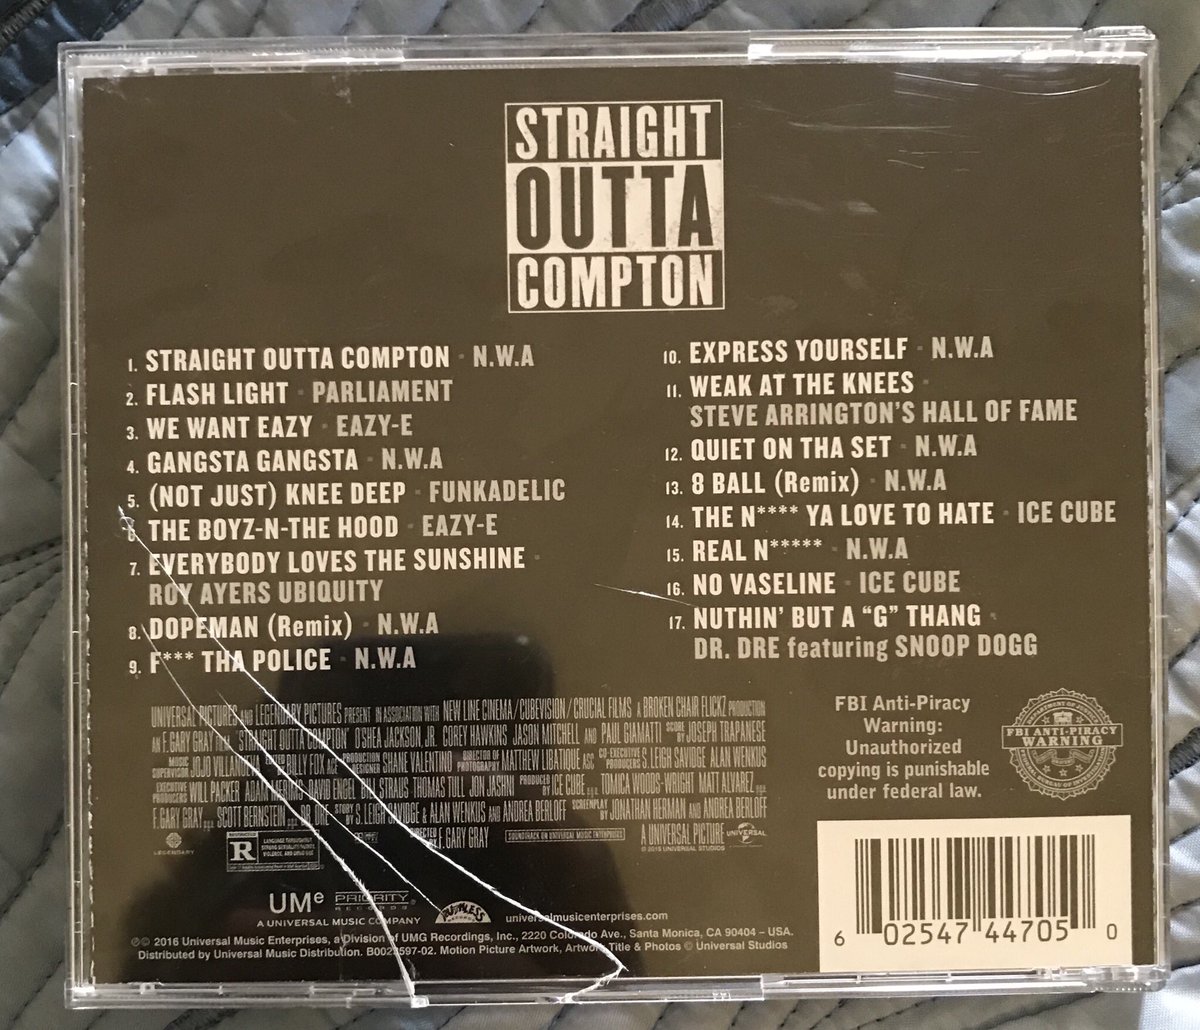 #10: Straight Outta Compton- Music from the Motion Picture. It’s a little tore up but that’s because my dad and I wore it out when it came out. (We have the original downstairs with the other CDs in our collection).